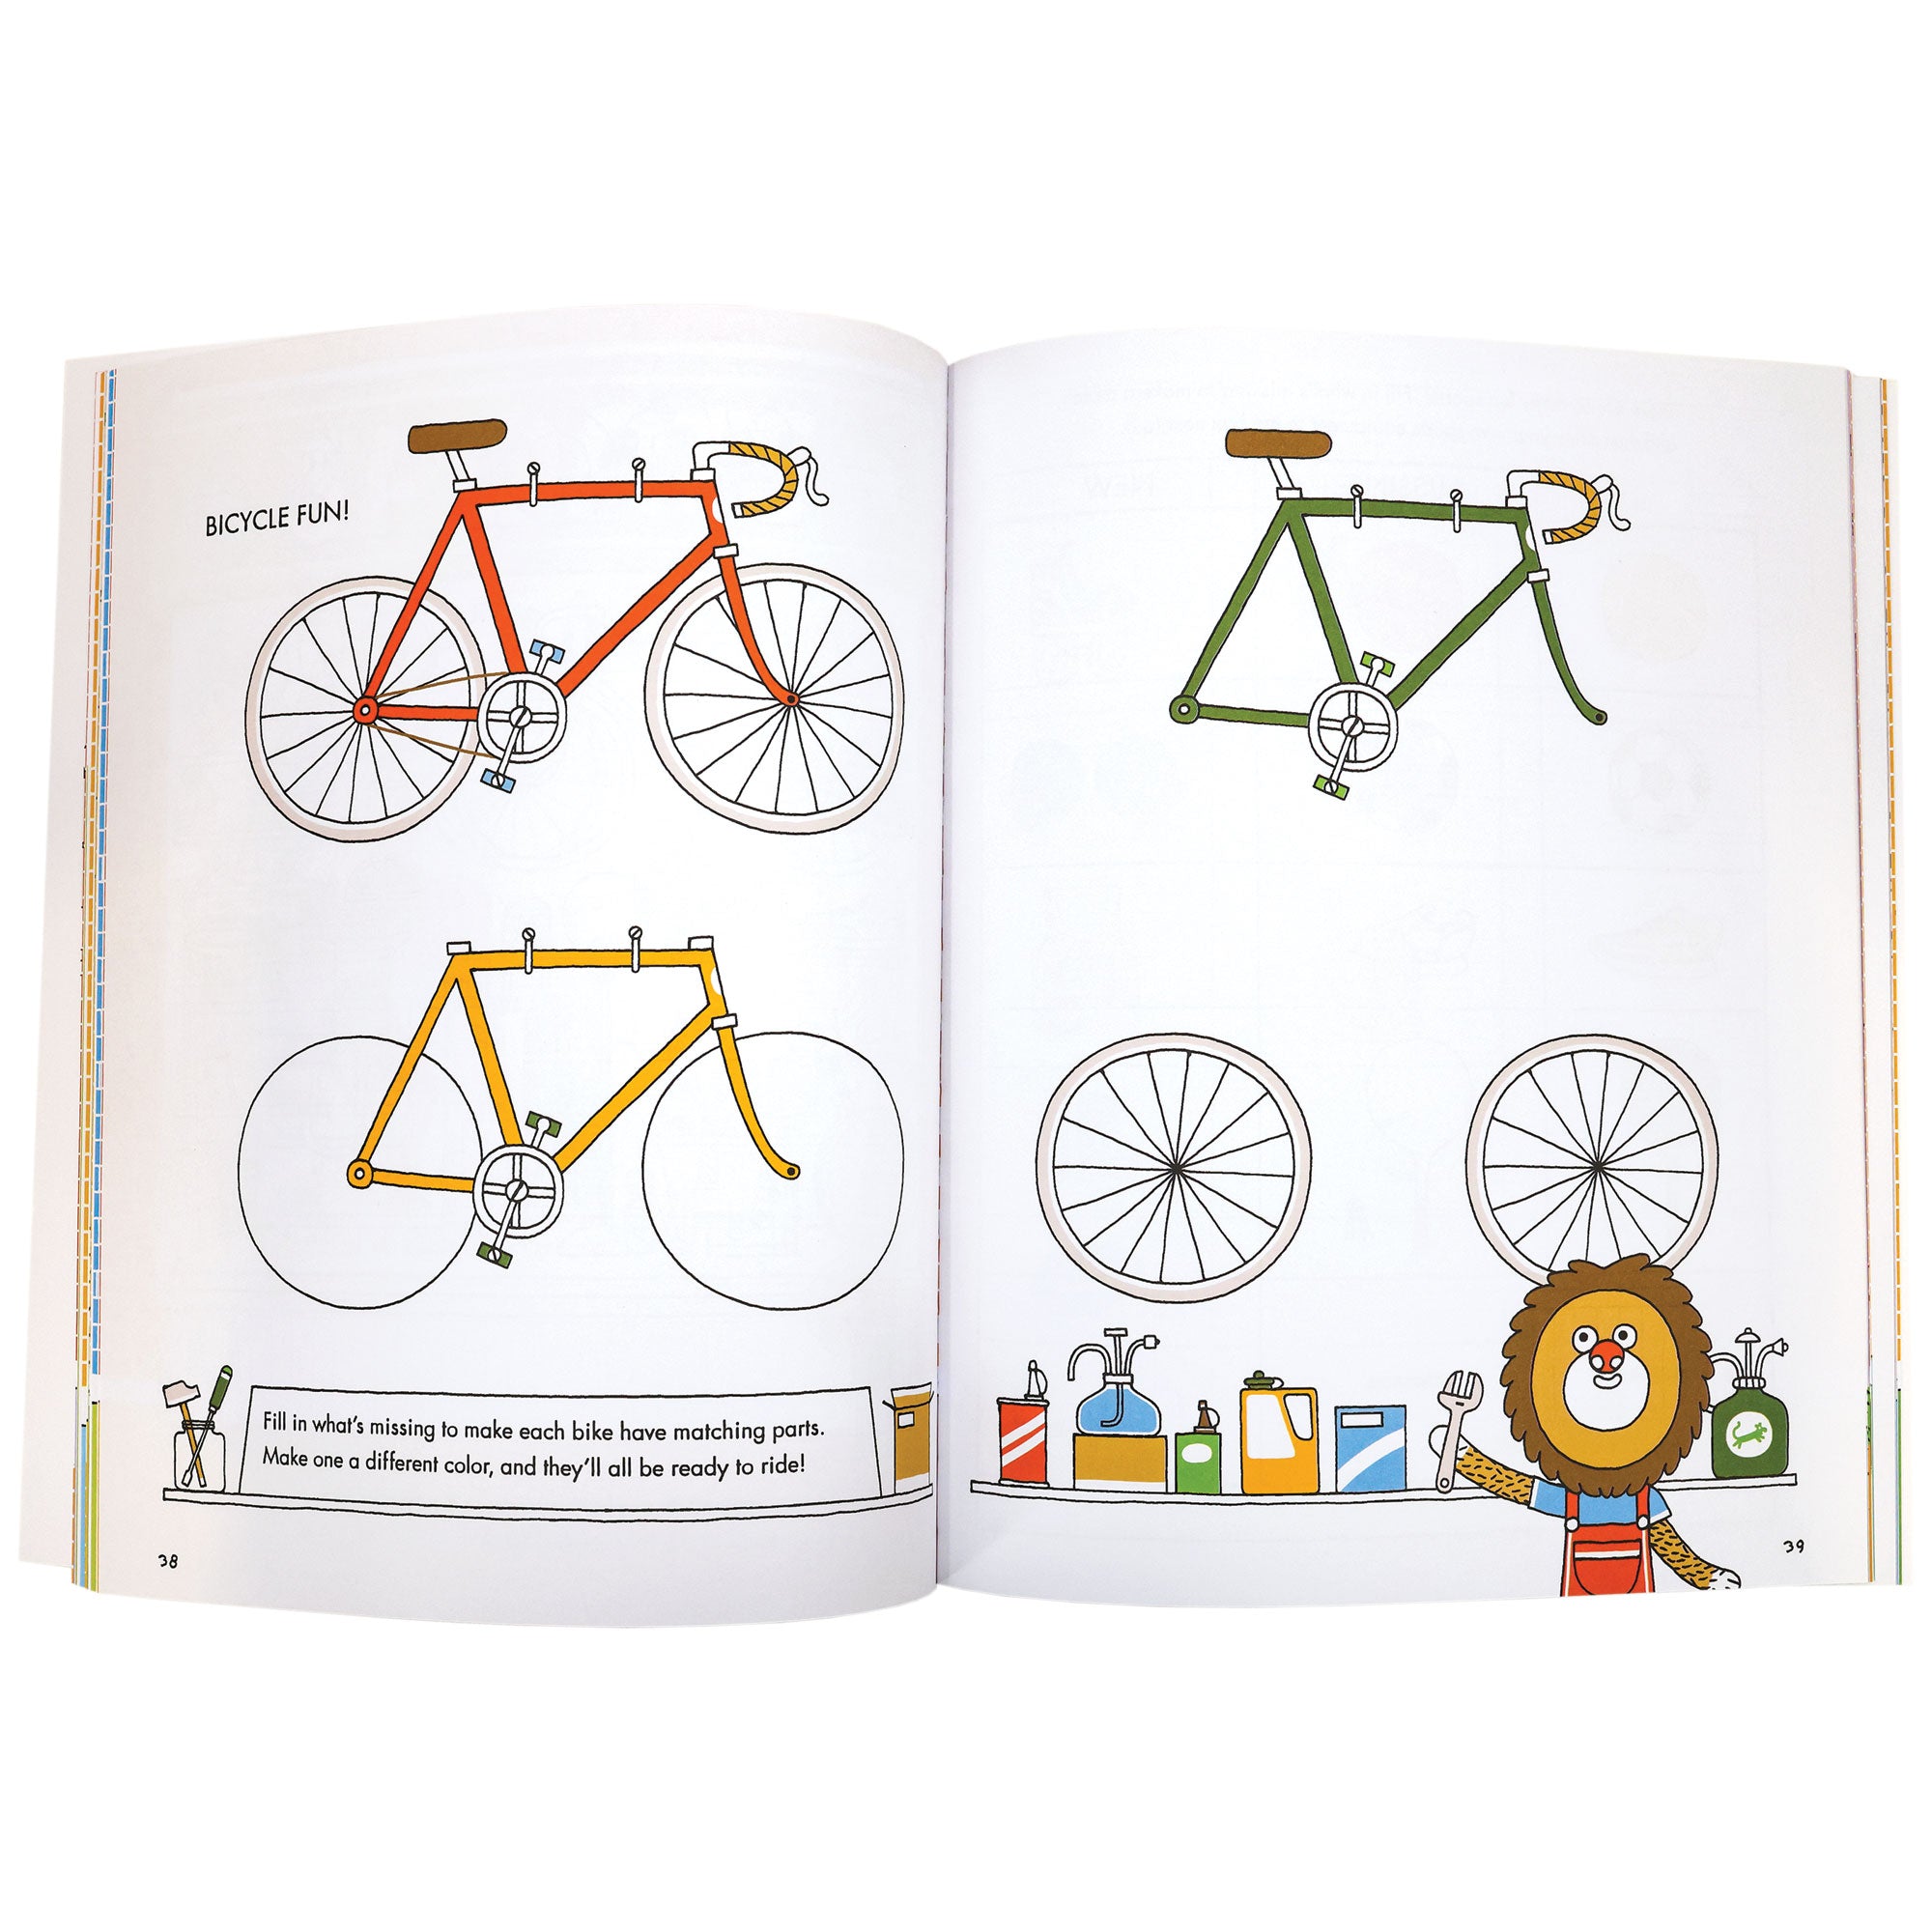 "What's New? What's Missing? What's Different?" book open to show inside. Left page shows 2 bikes; one red on top and one yellow below that is incomplete. On the right page is the body of a green bike, but with no wheels. Below that is a pair of wheels, but no bike body. The instructions say to complete the bikes. There is an illustration of a lion below holding a wrench and standing in front of a shelf with oil cans on it.